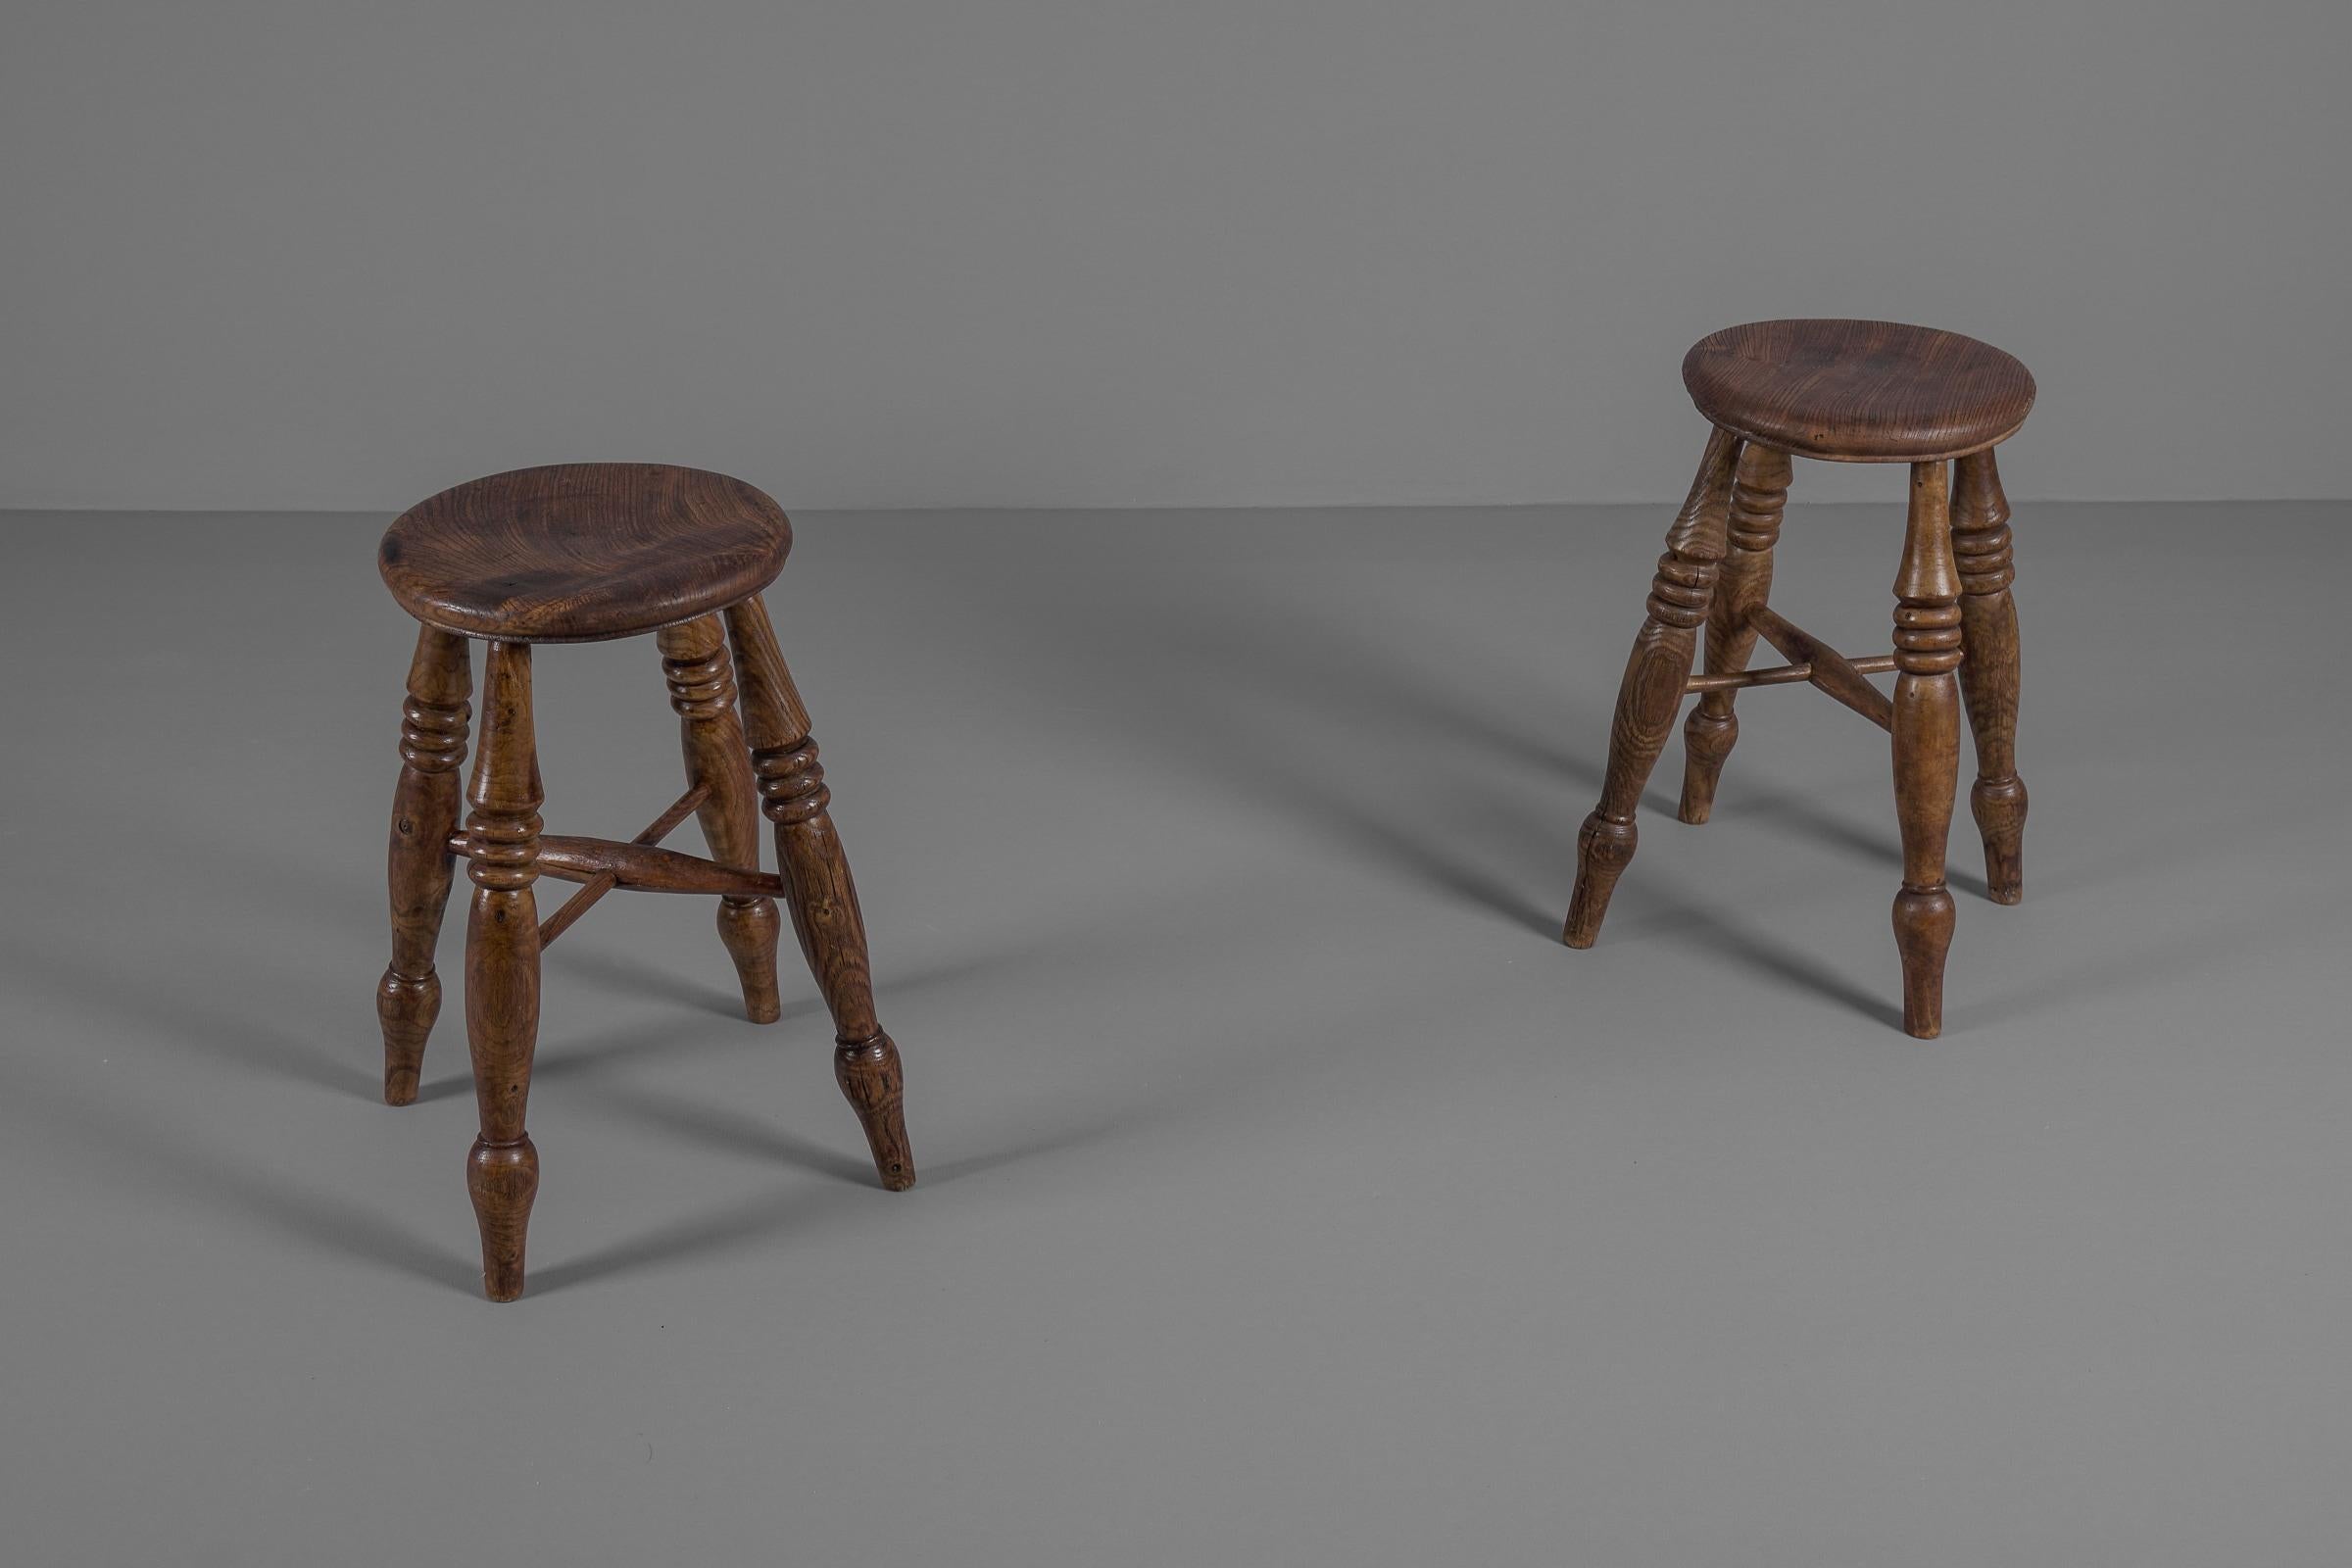 European Pair of Lovely Old Wooden Stools, 1950s France